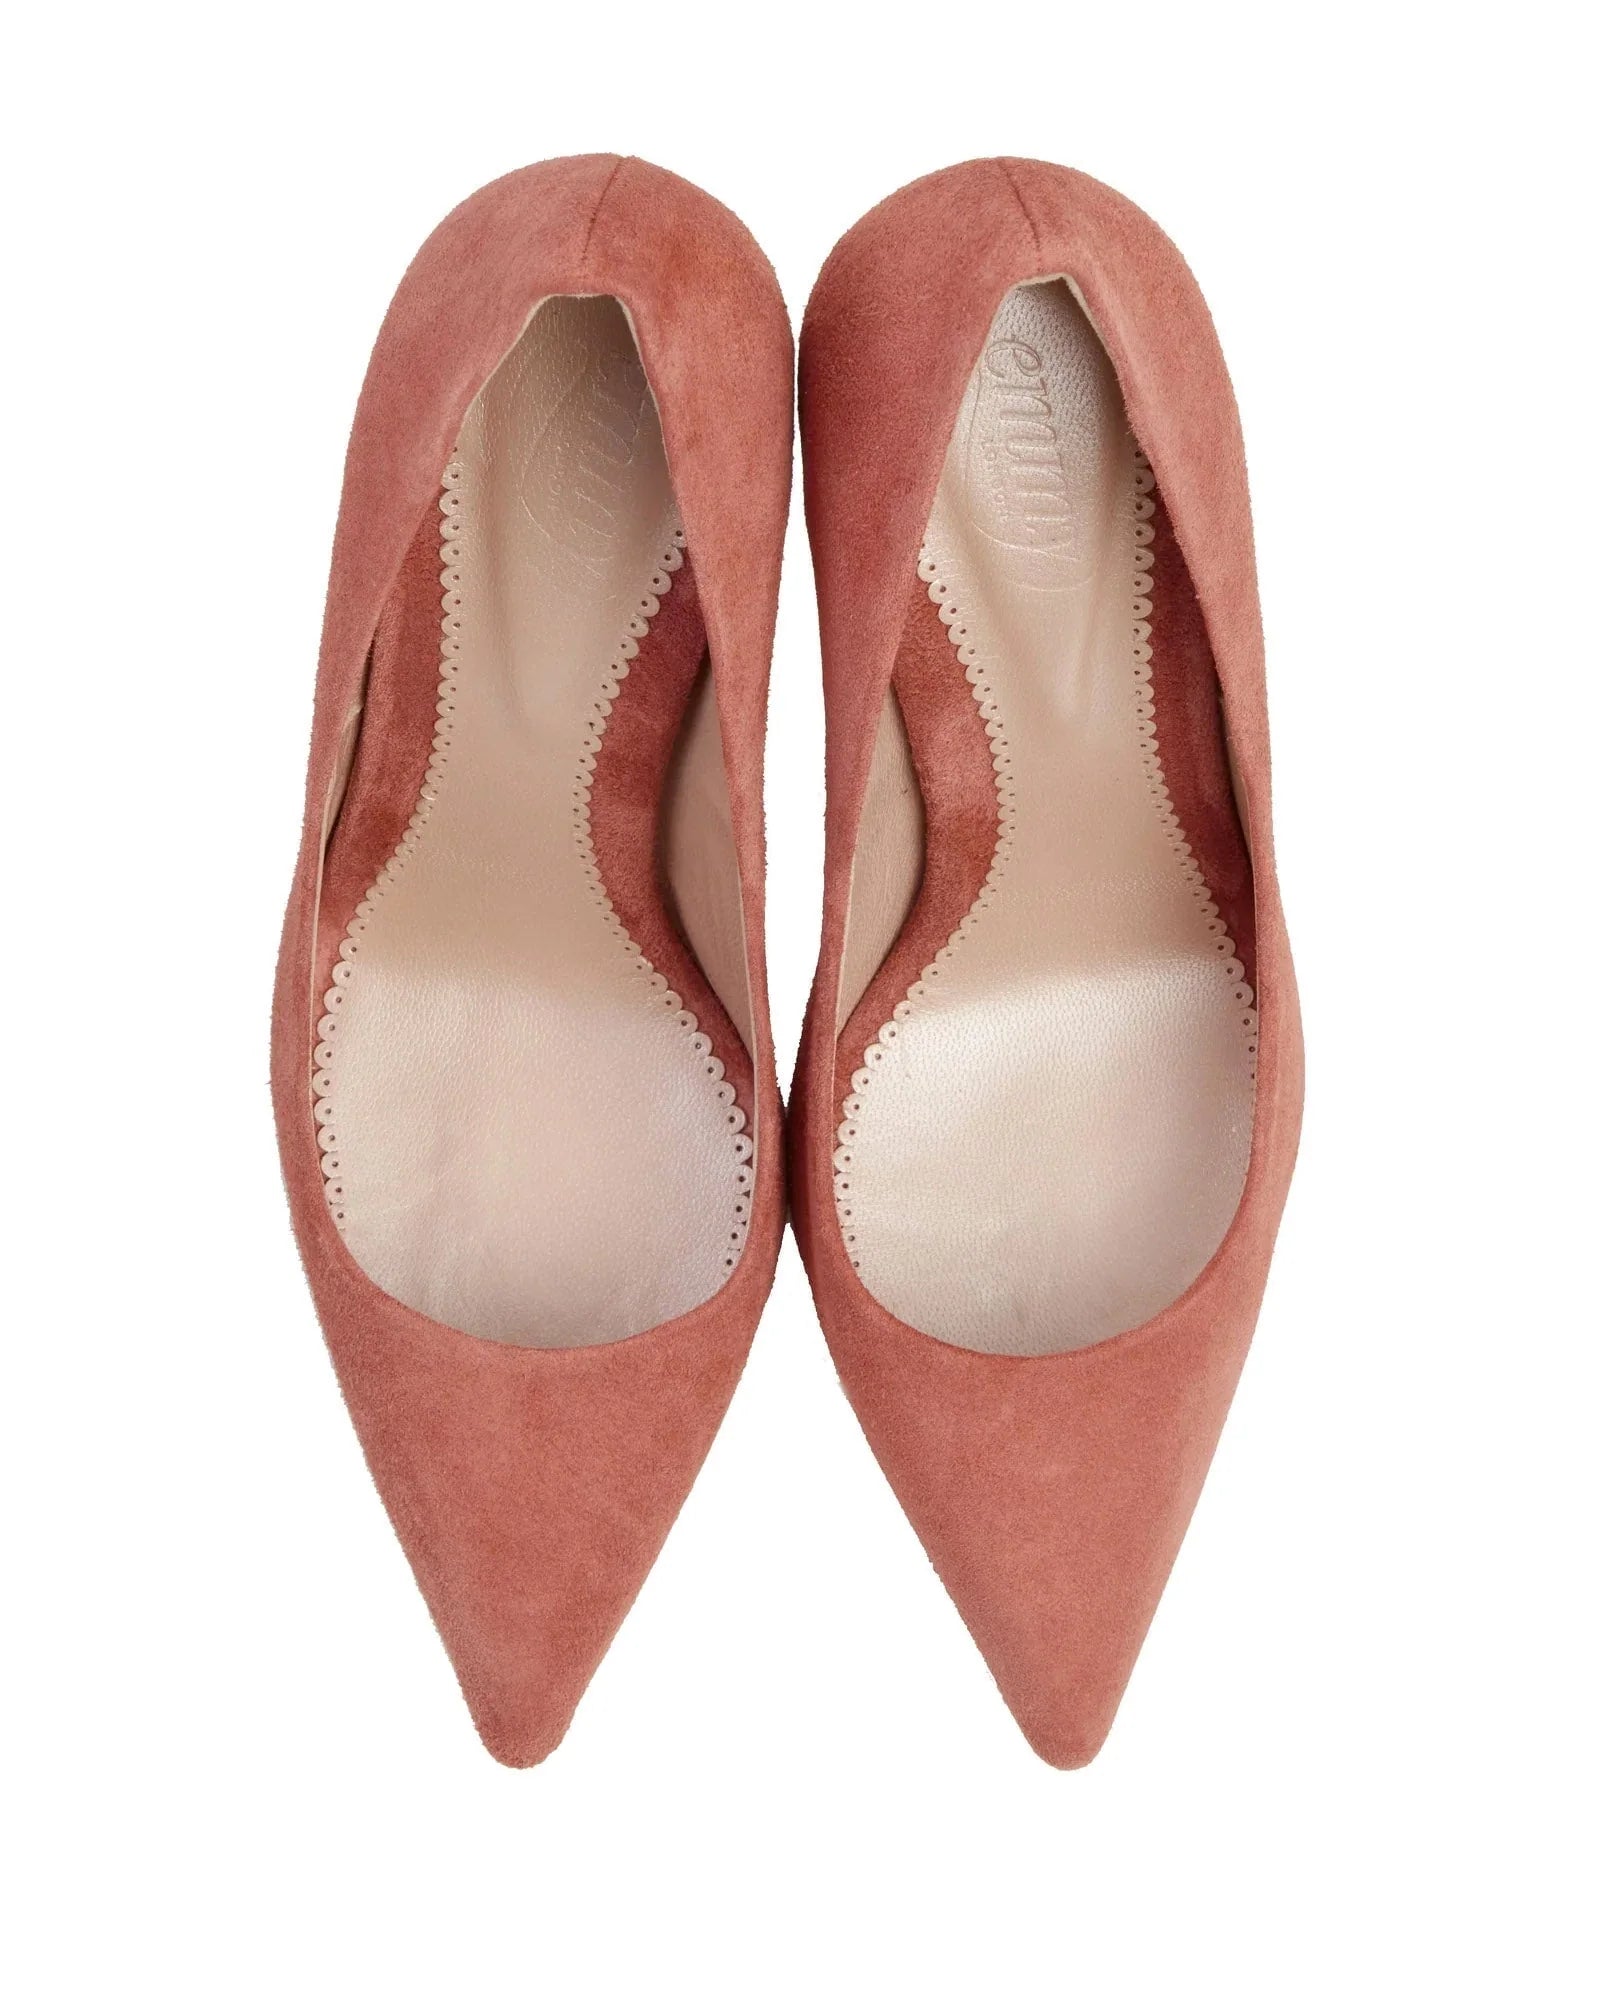 Claudia Mid Heel Fashion Shoe Pink Pointed Court Shoe  image